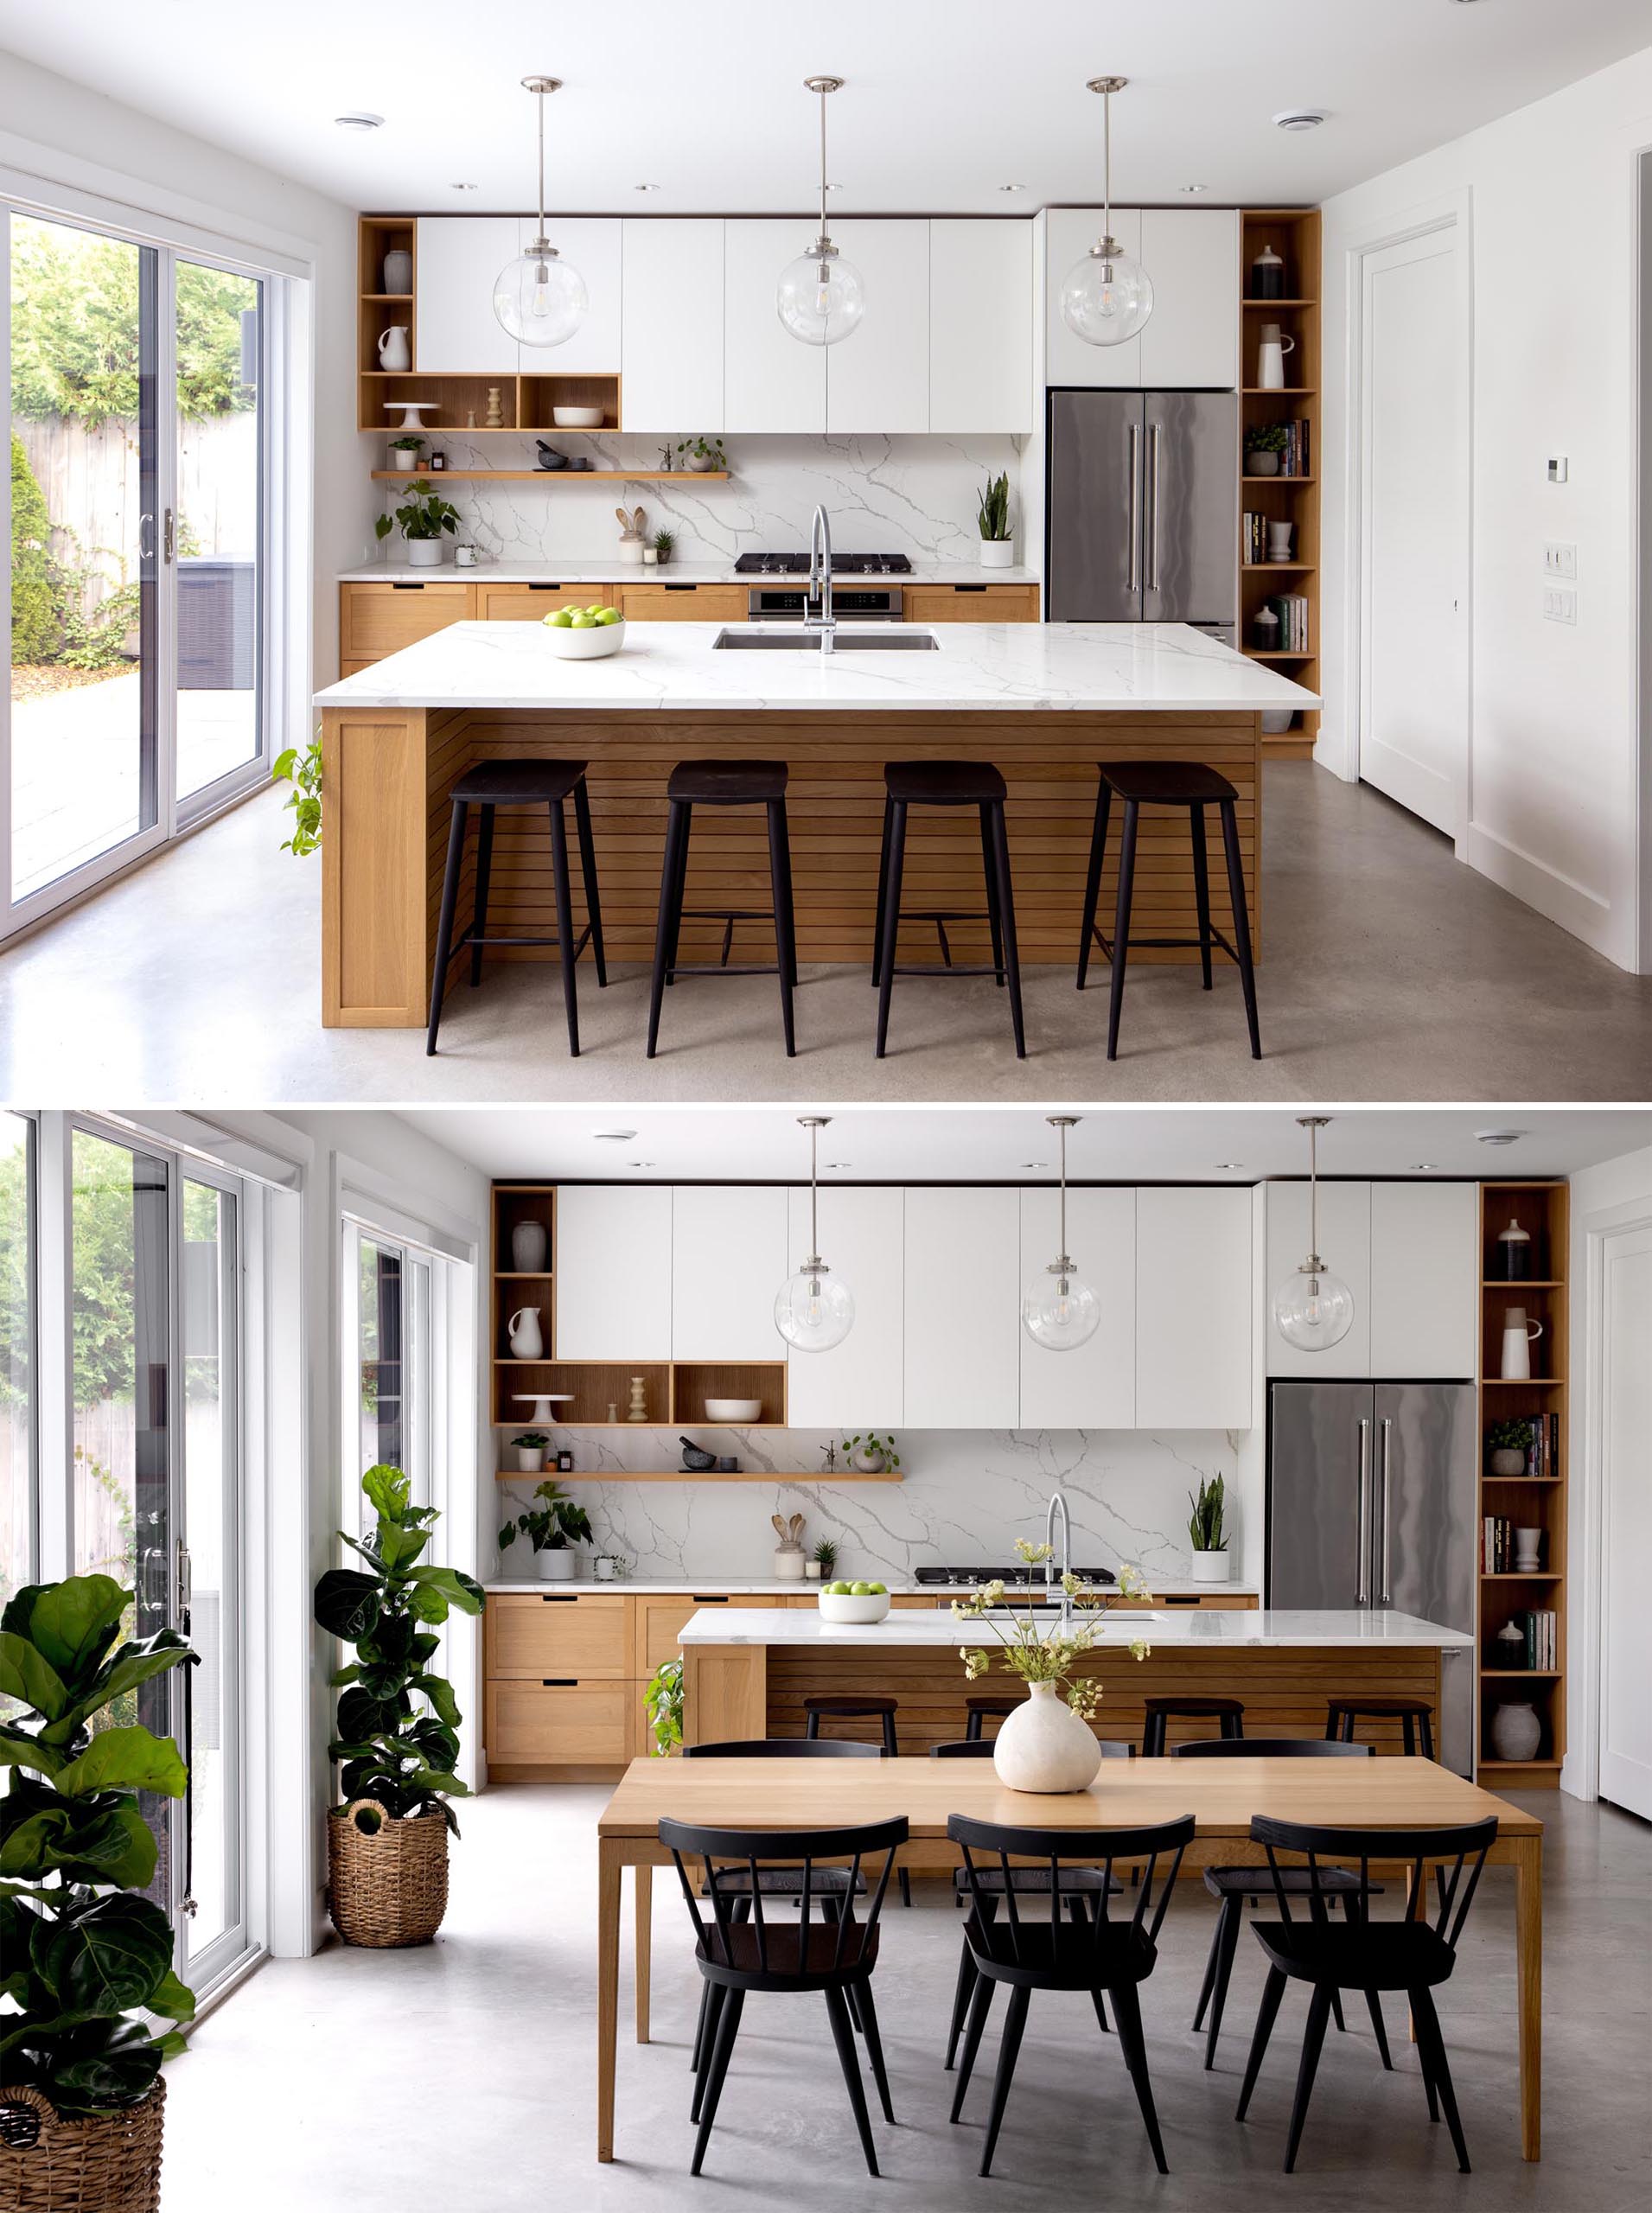 In this modern kitchen, light wood cabinets and open shelving have been paired with minimalist white cabinets.